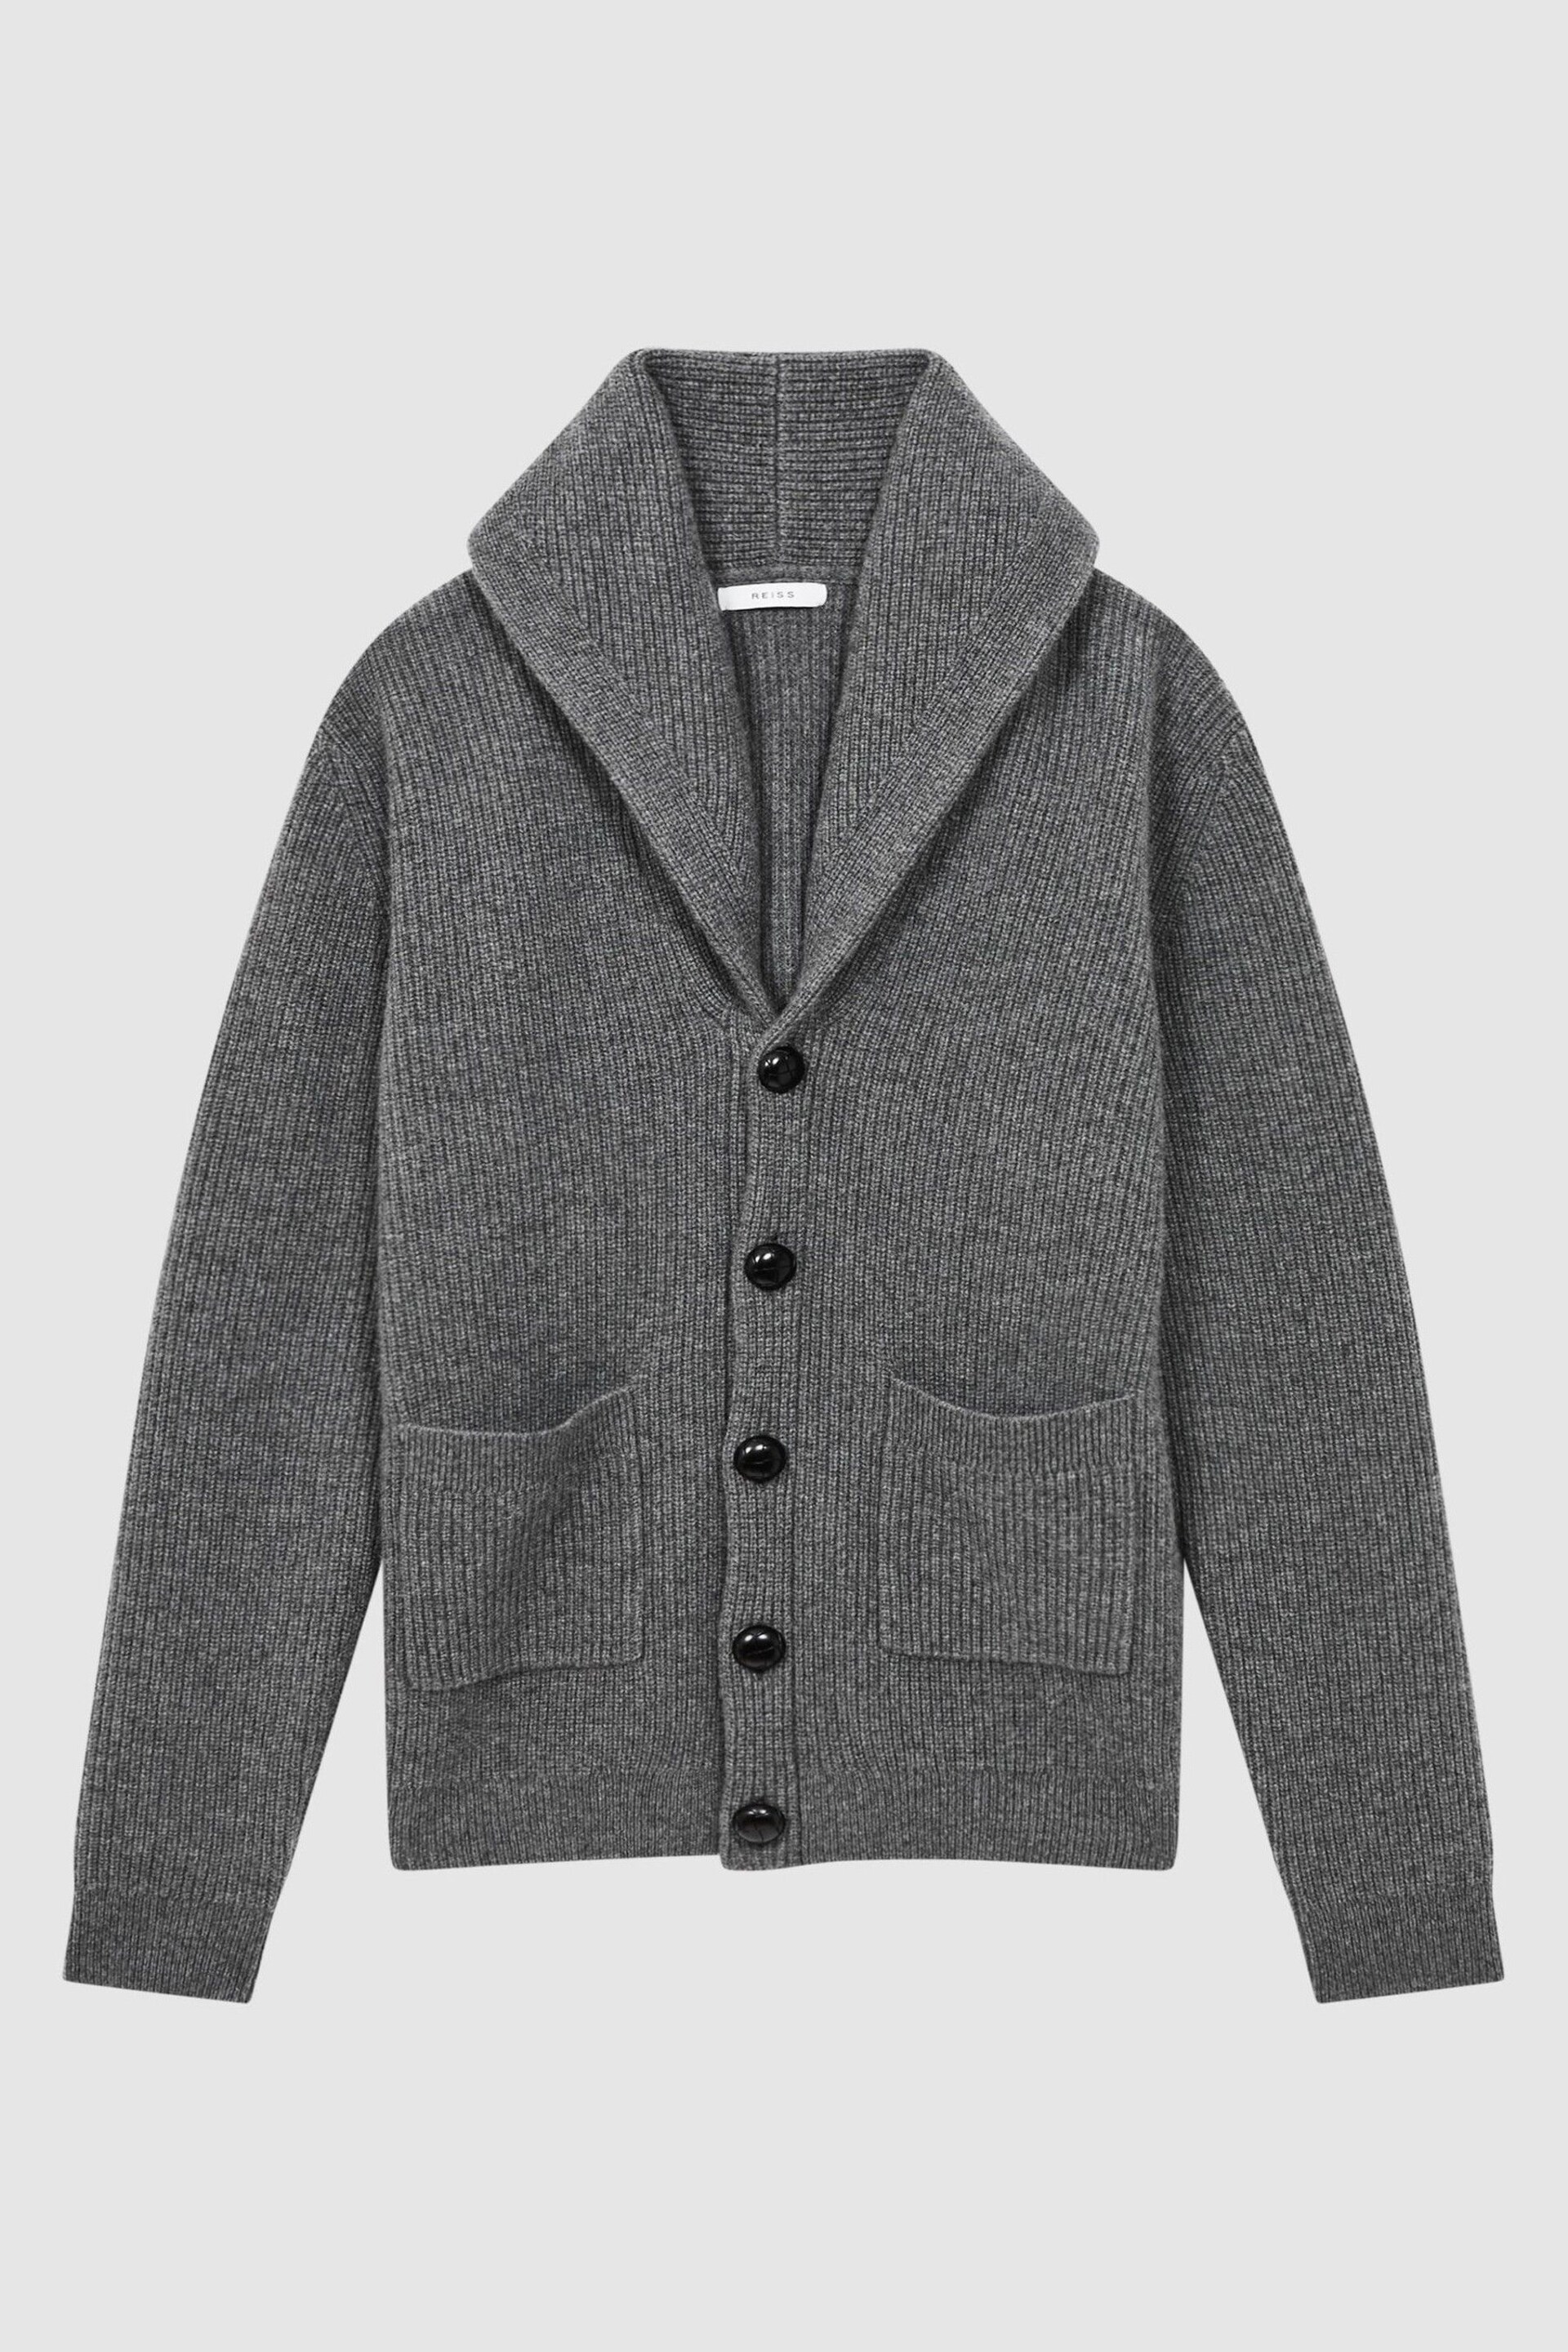 Reiss Charcoal Melange King Cashmere Button-Through Cardigan - Image 2 of 7